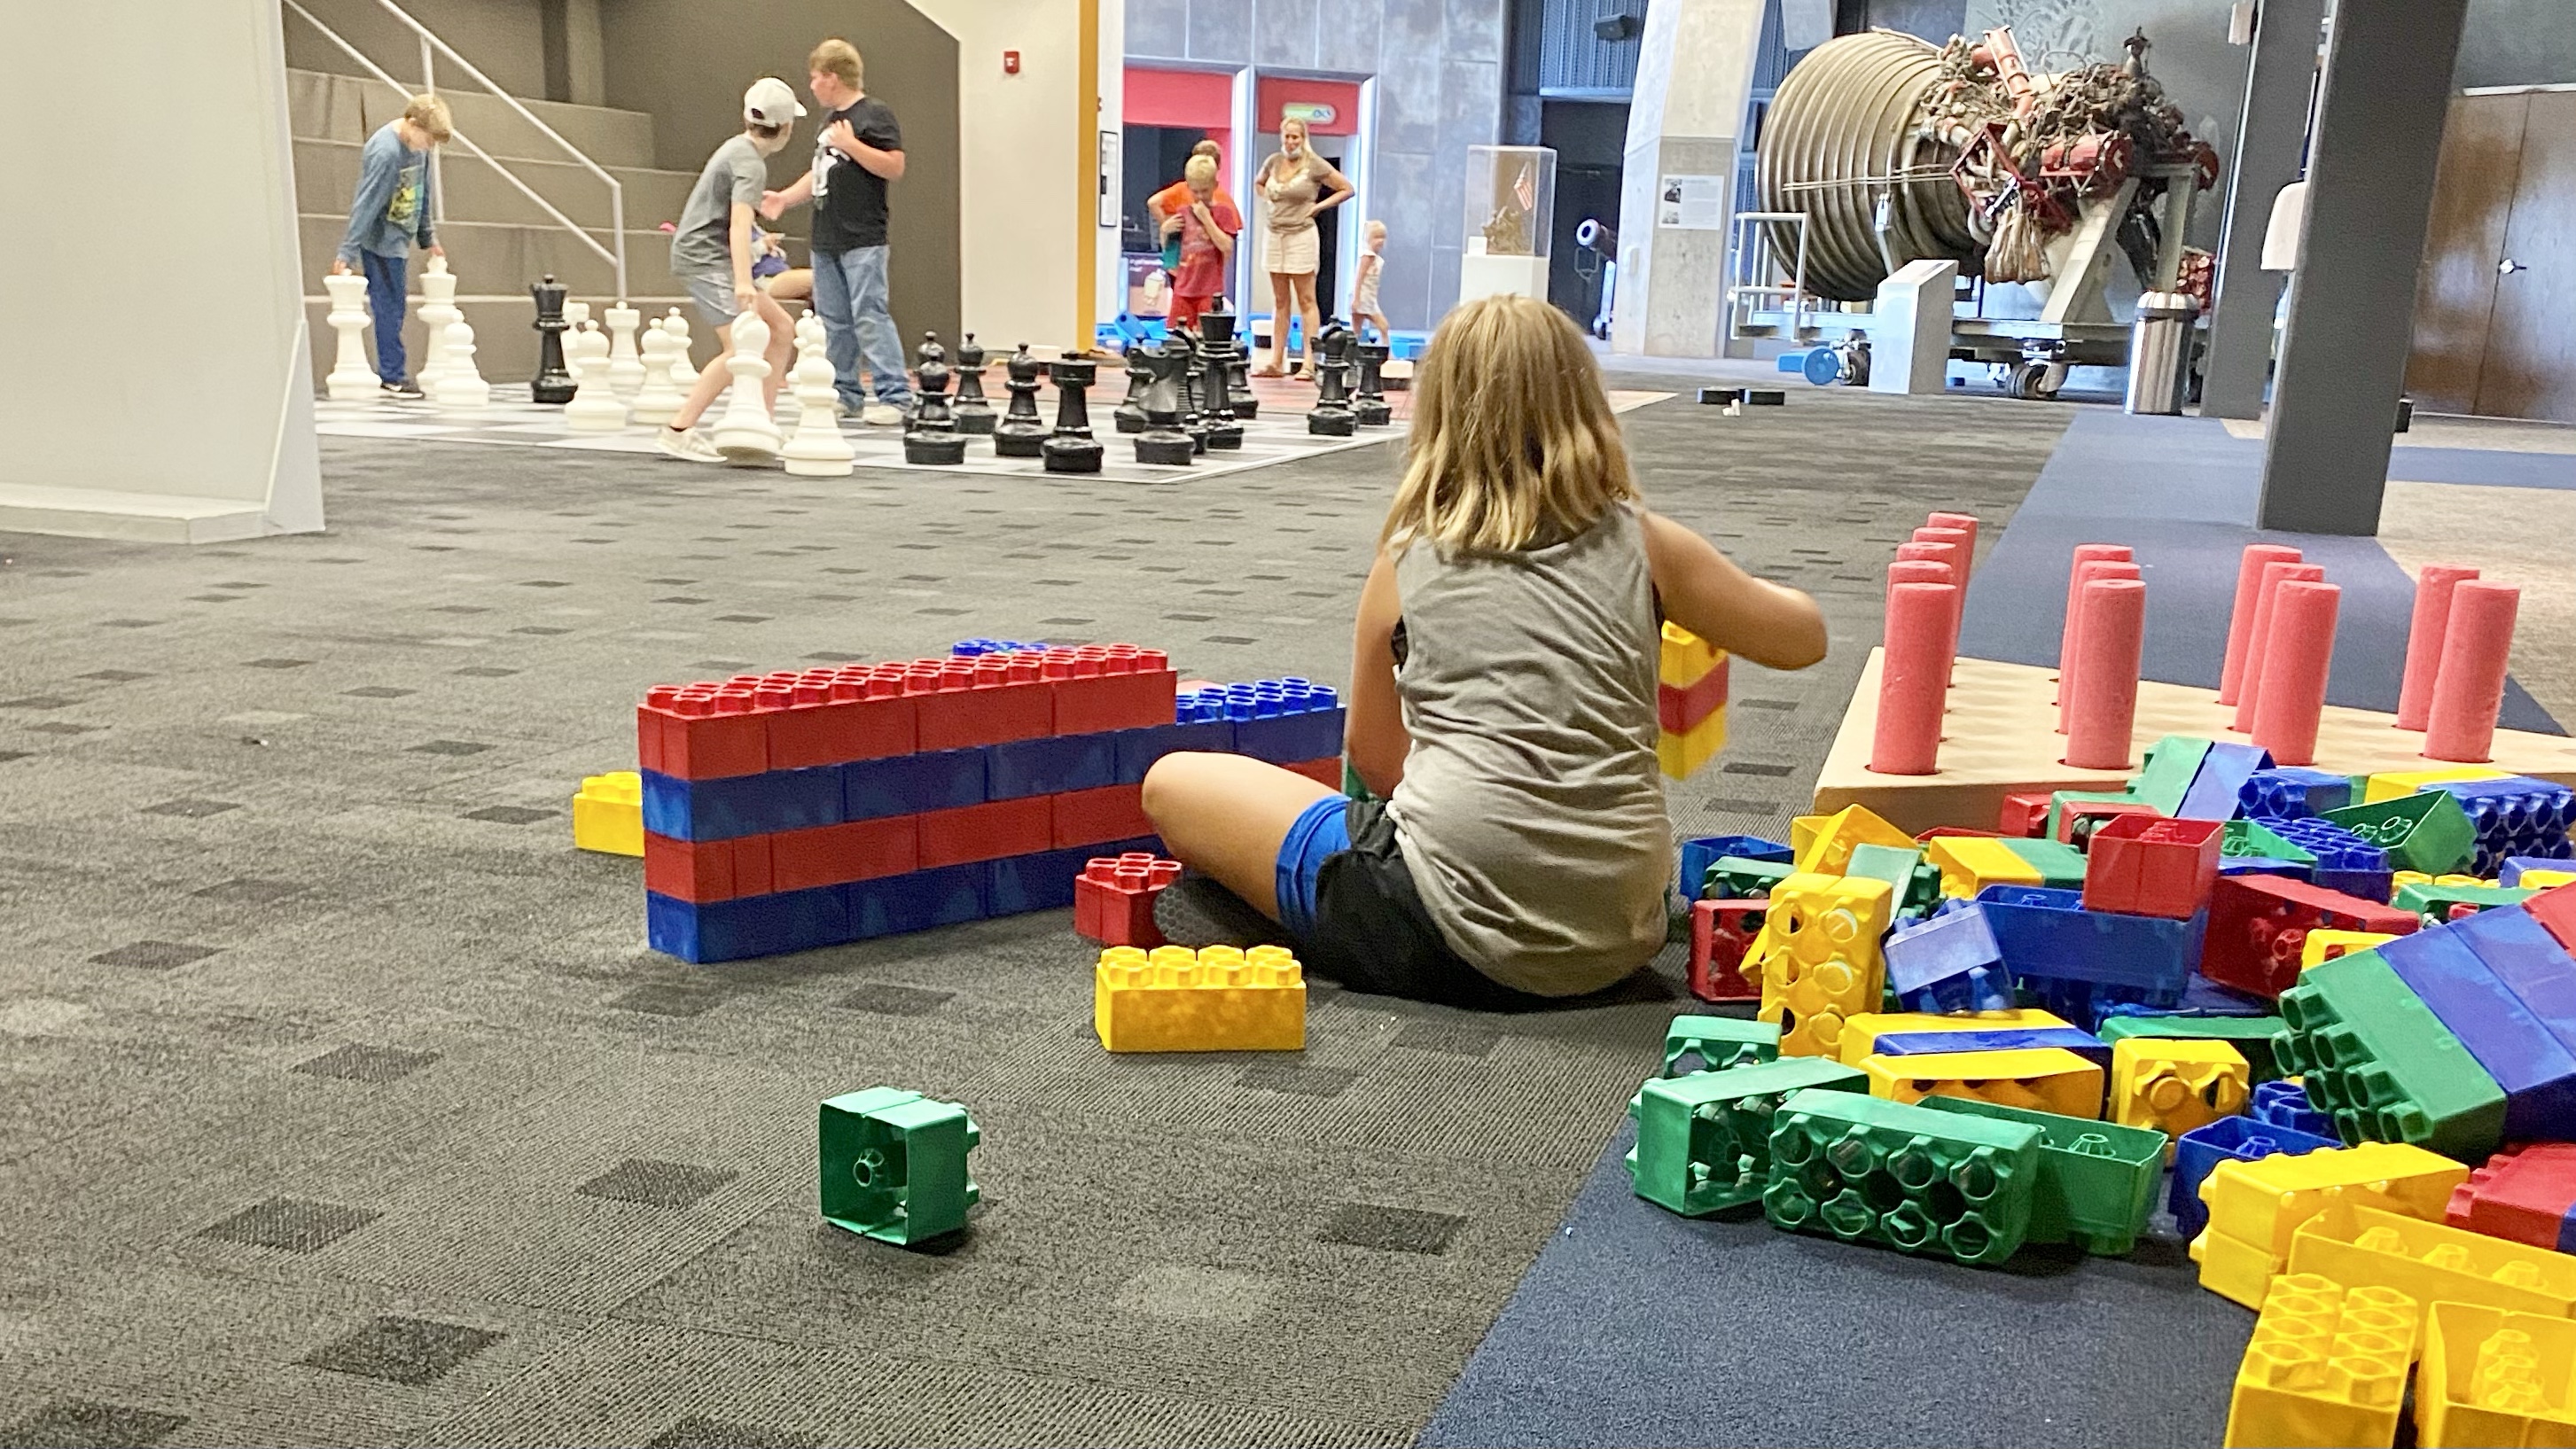 Playing with Giant Legos at the Oklahoma Science Museum